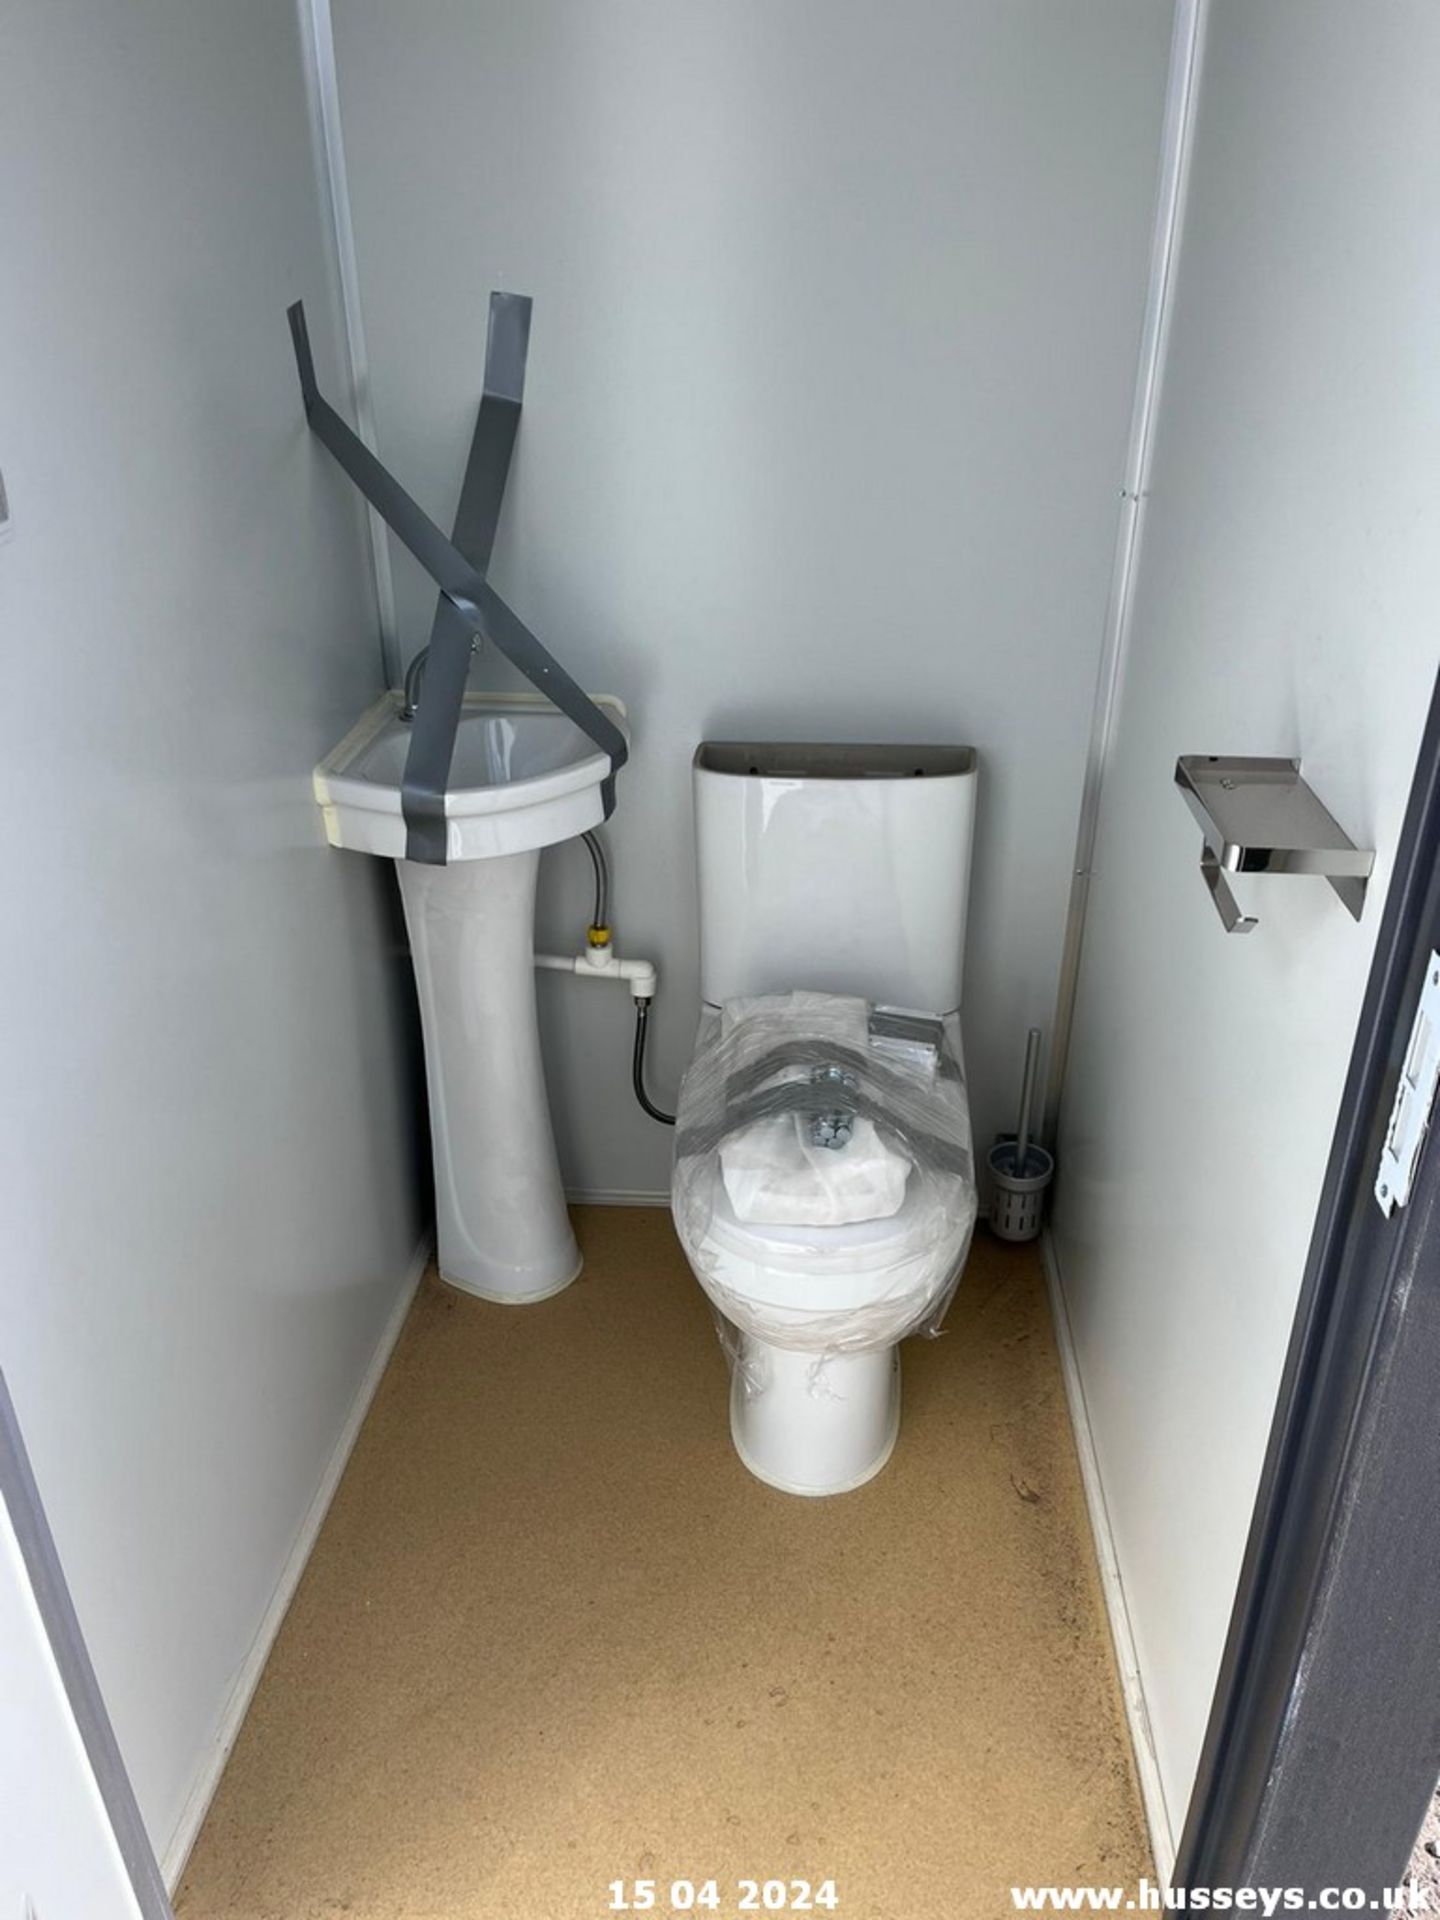 2 PERSON TOILET C.W FORK POCKETS & LIFT EYES 2X WC'S SINKS LIGHTS EXTRACTORS & KEYS - Image 8 of 10